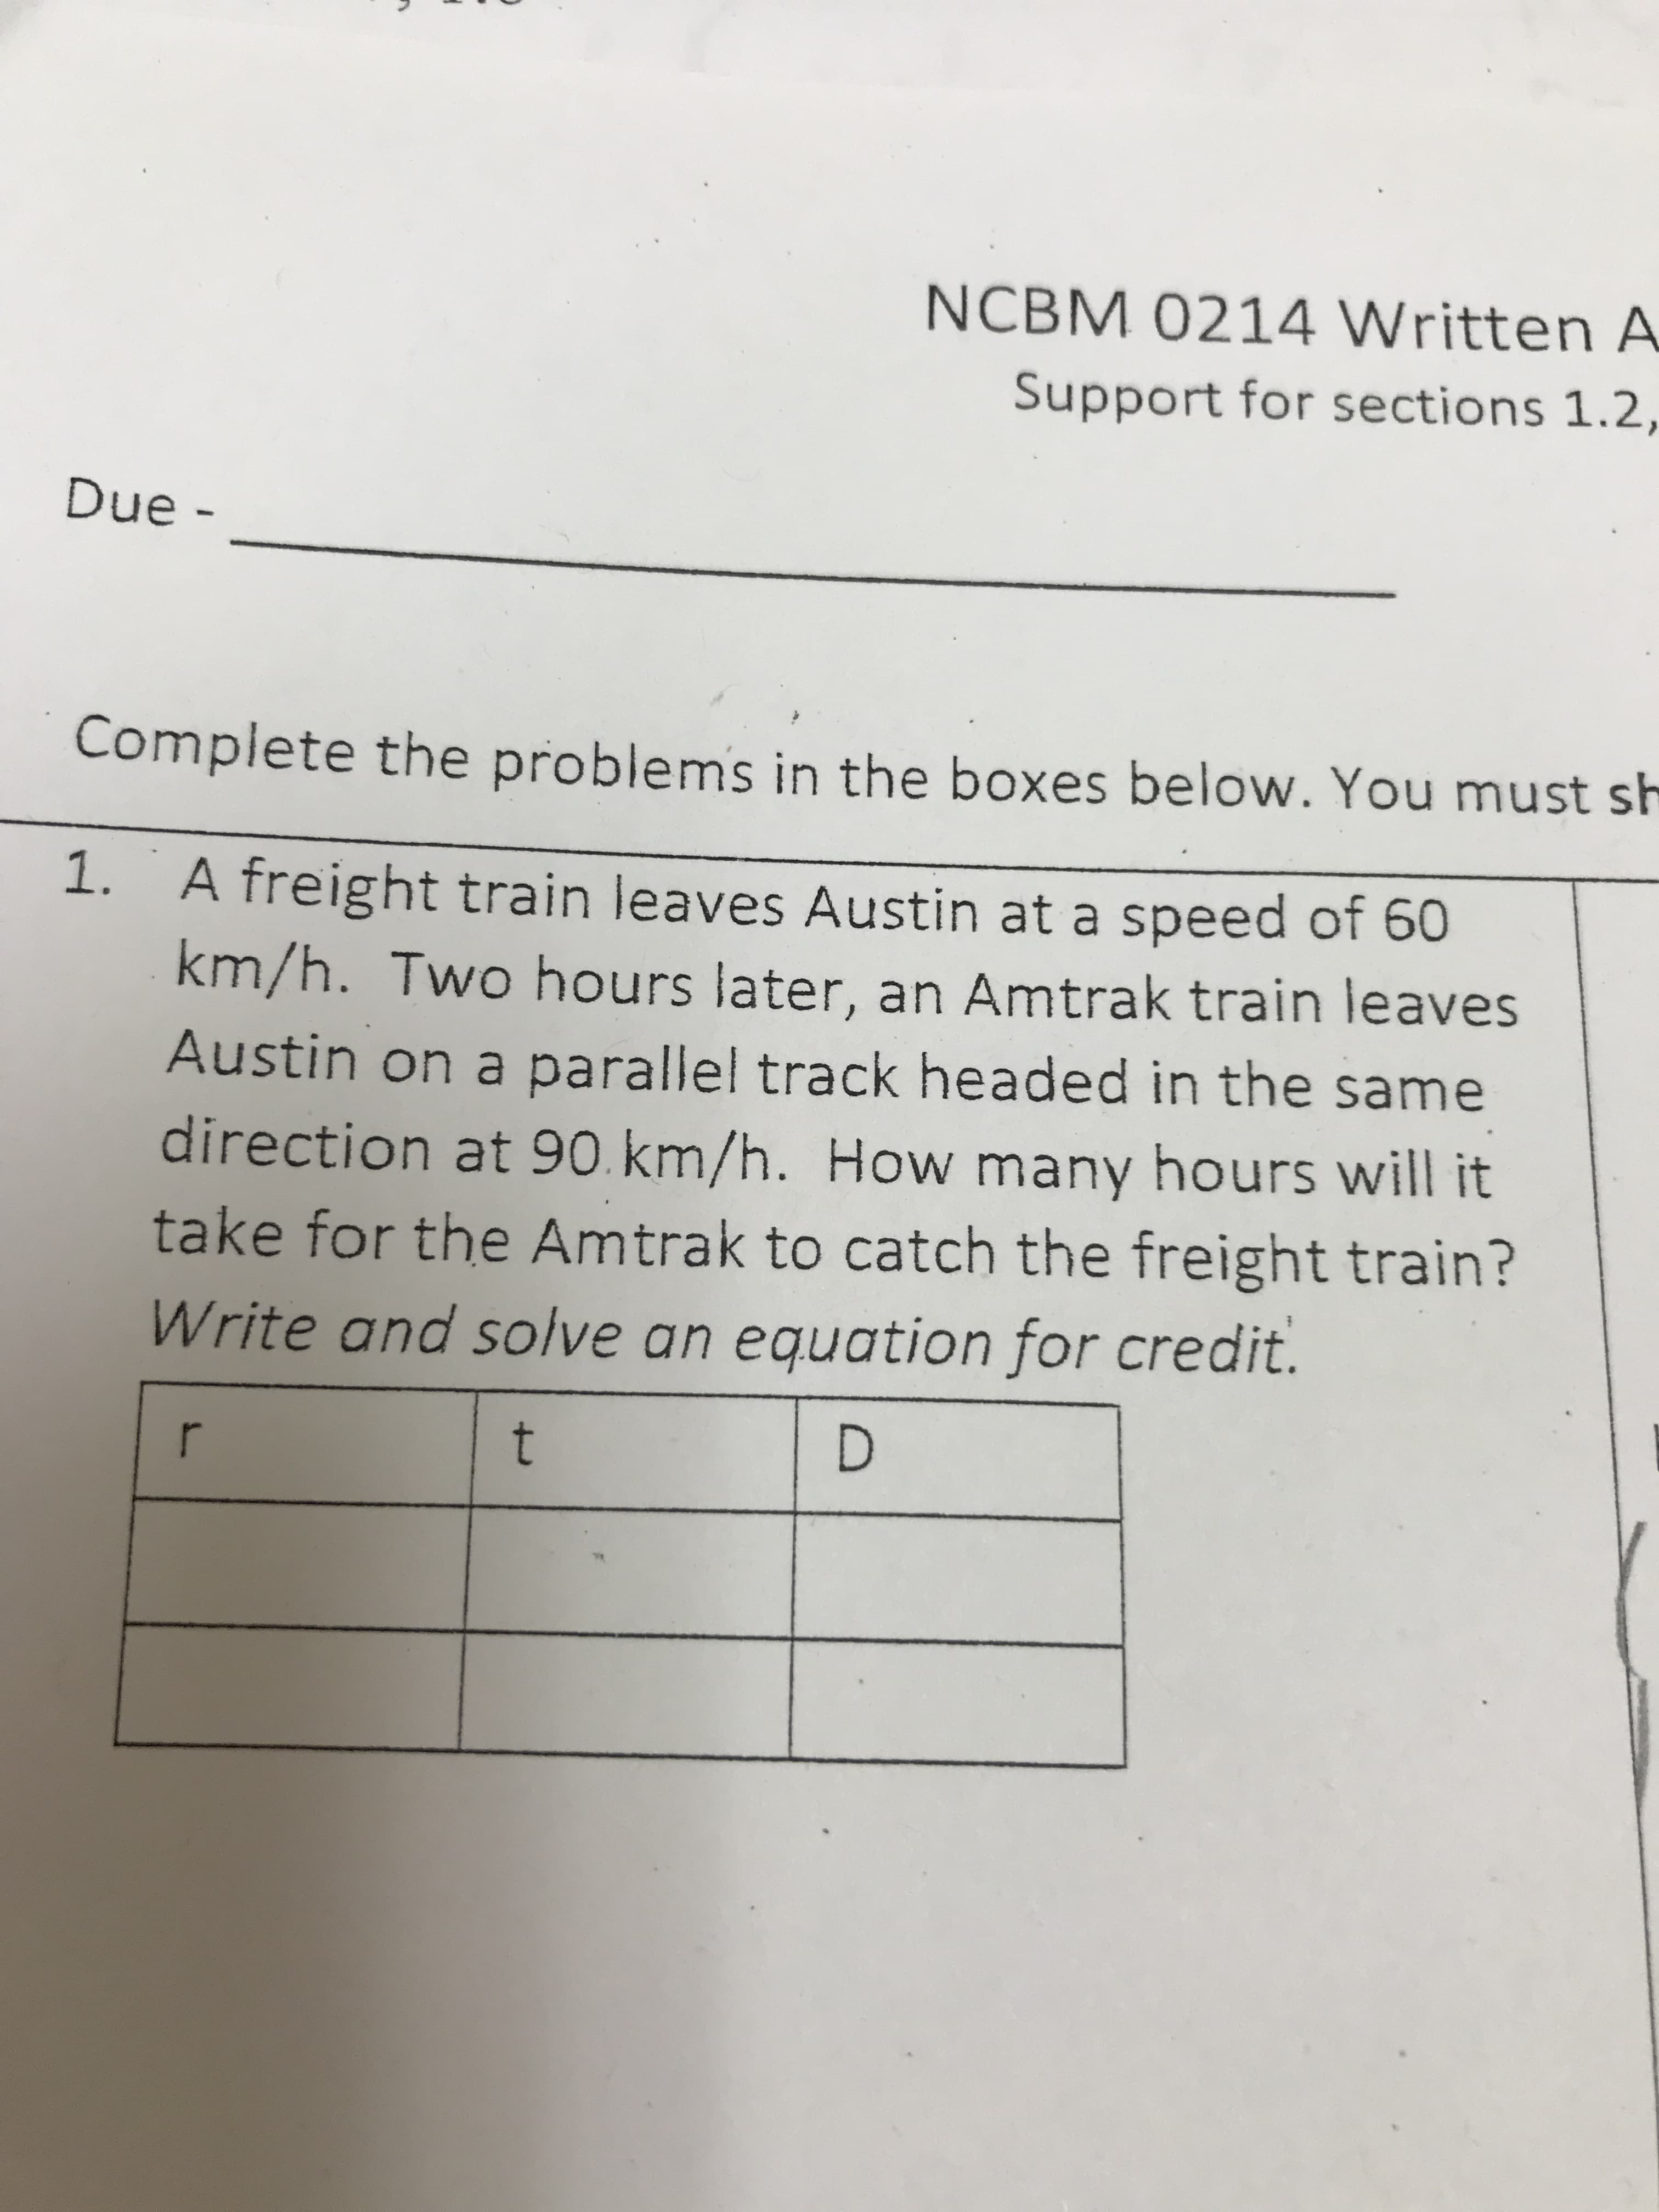 NCBM 0214 Written A
Support for sections 1.2,
Due -
Complete the problems in the boxes below. You must sh
1. A freight train leaves Austin at a speed of 60
km/h. Two hours later, an Amtrak train leaves
Austin on a parallel track headed in the same
direction at 90. km/h. How many hours will it
take for the Amtrak to catch the freight train?
Write and solve an equation for credit.
D
t
r
